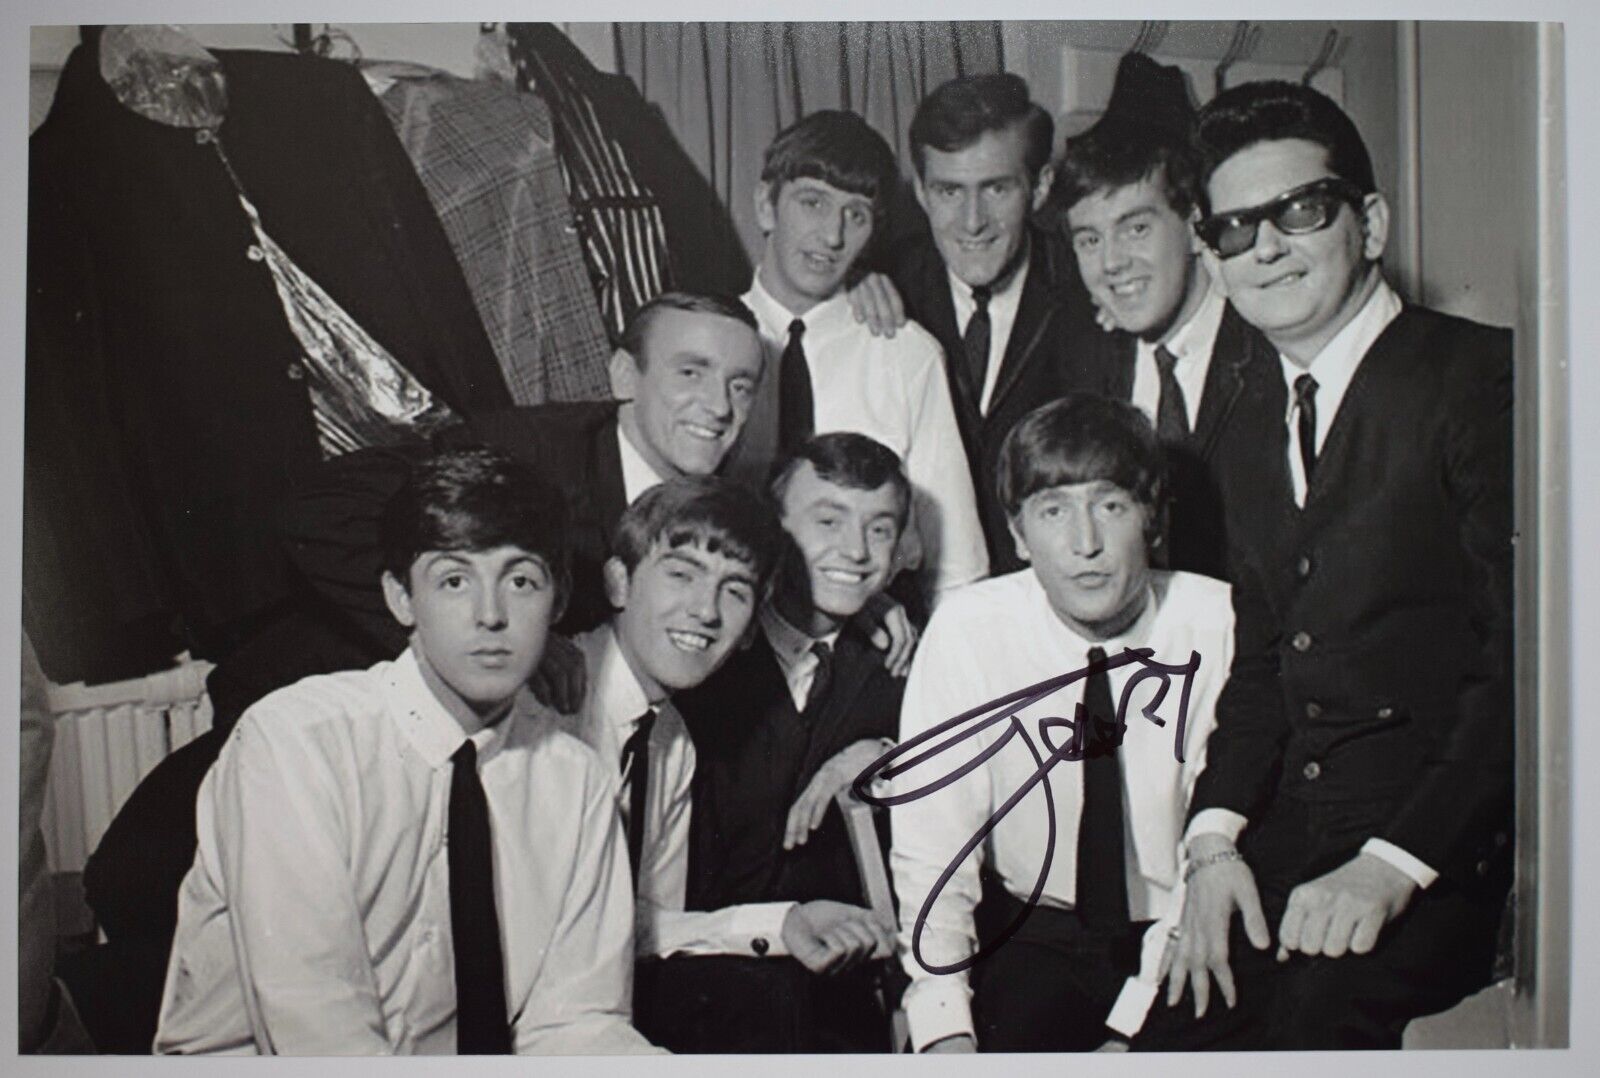 Gerry Marsden Signed Autograph 12x8 Photo Pacemakers Music Singer COA AFTAL